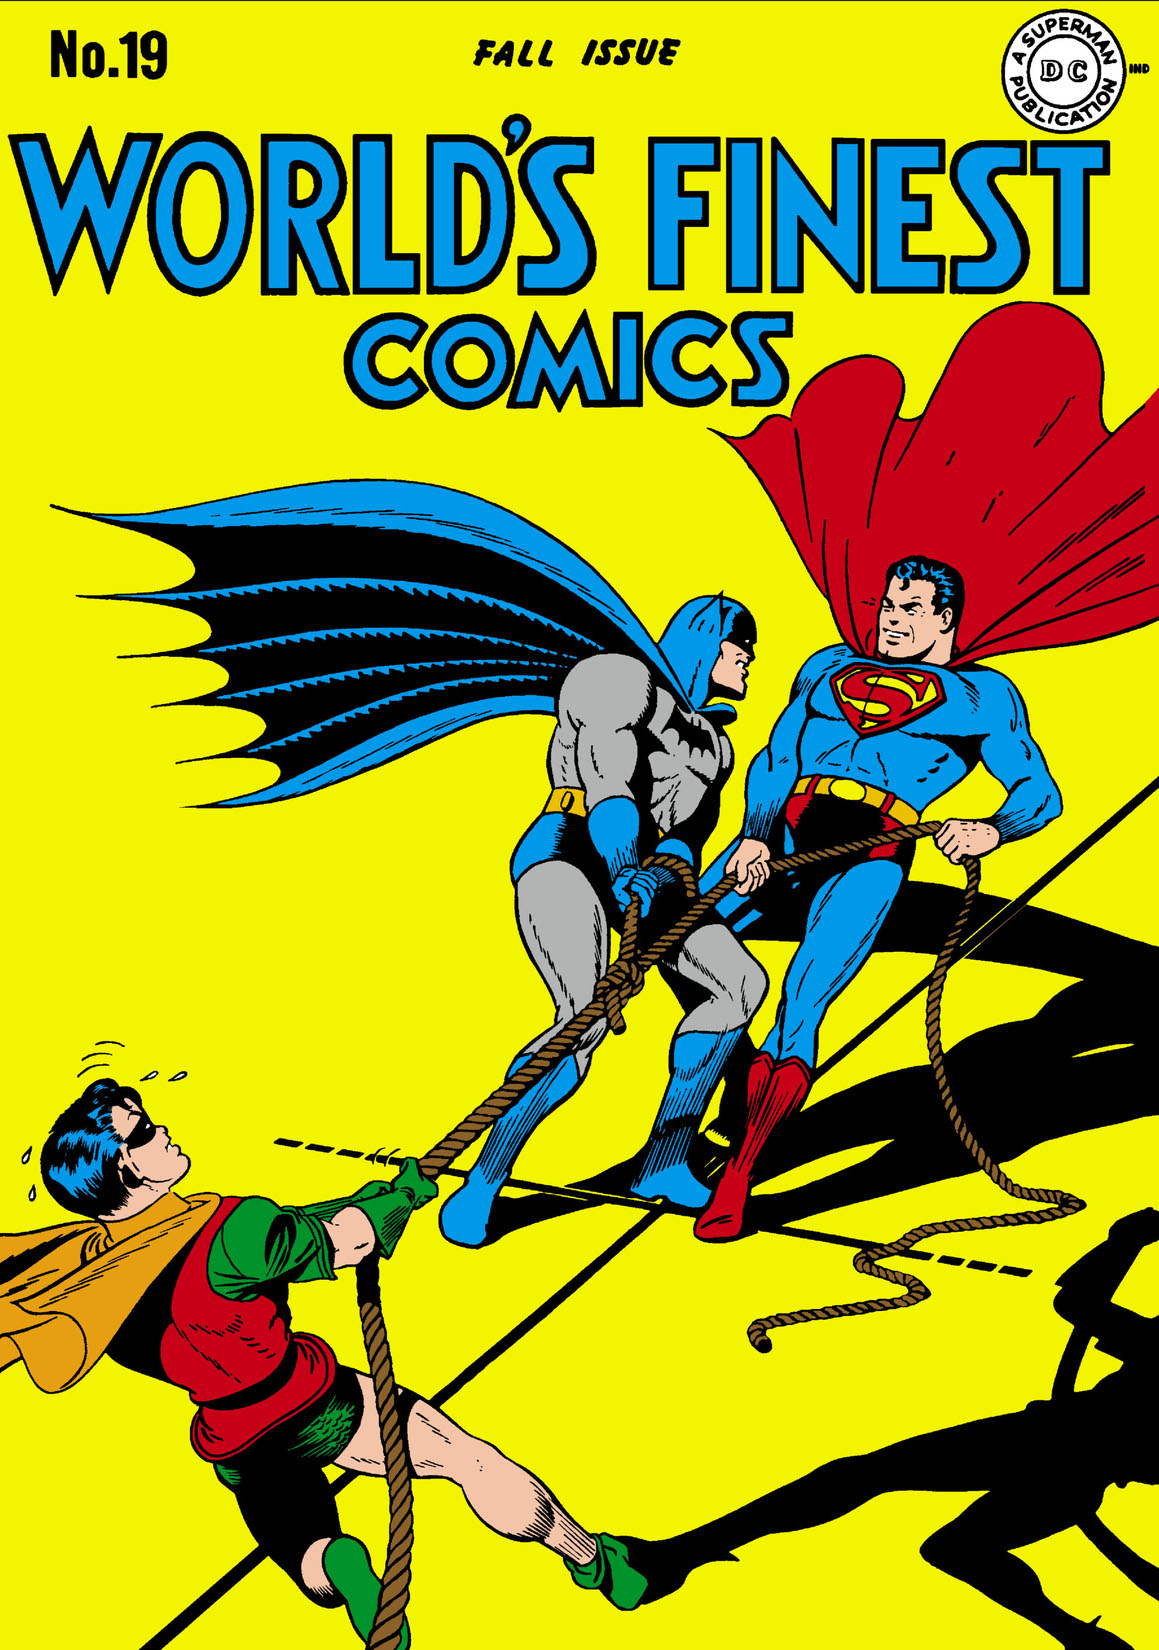 World's Finest Comics (1941-1986) #19 preview images